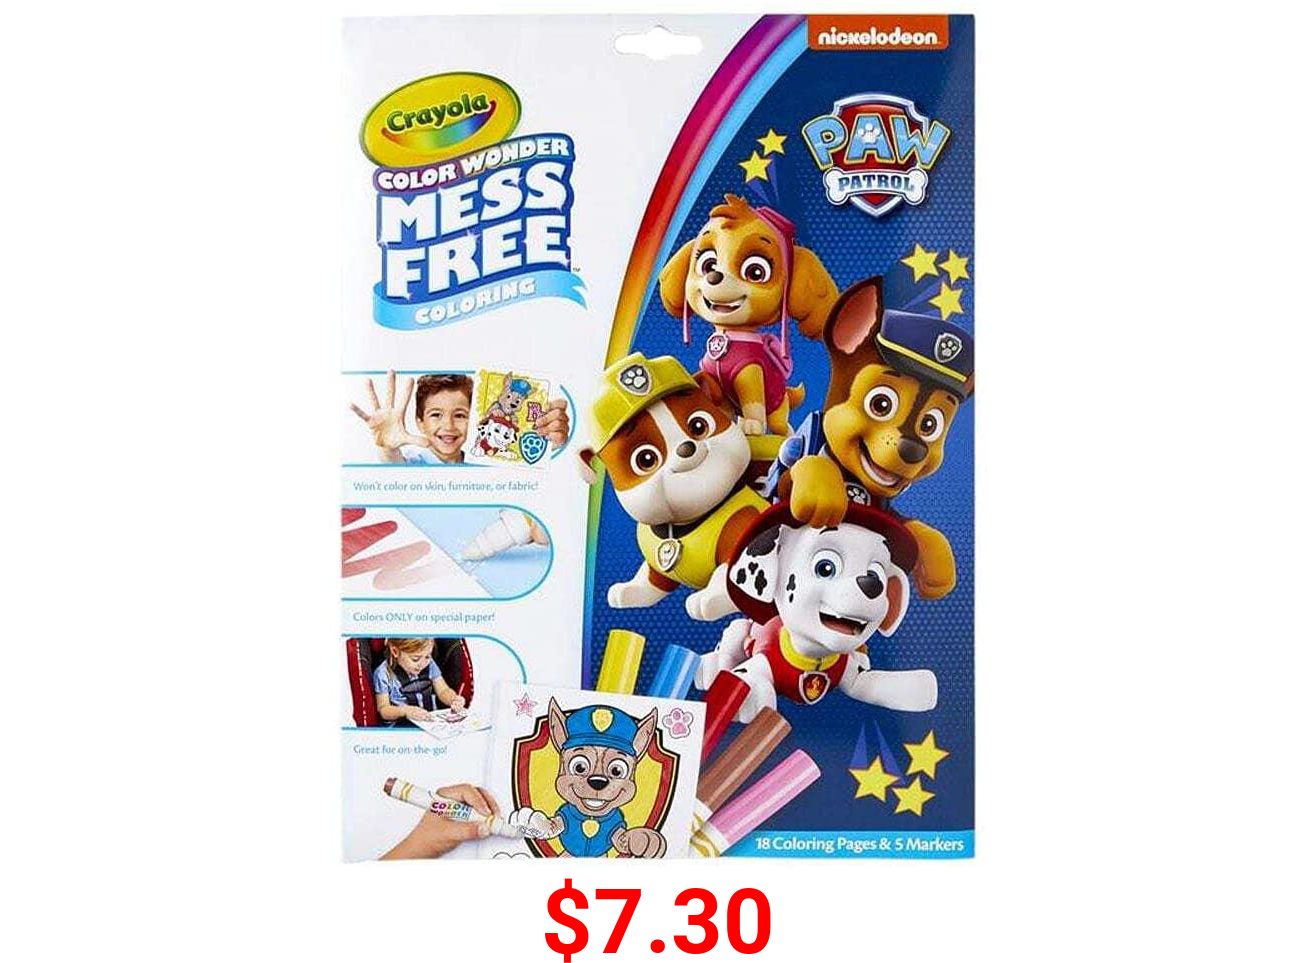 Crayola Paw Patrol Color Wonder, Mess Free Coloring Pages & Markers, Styles May Vary, Gift